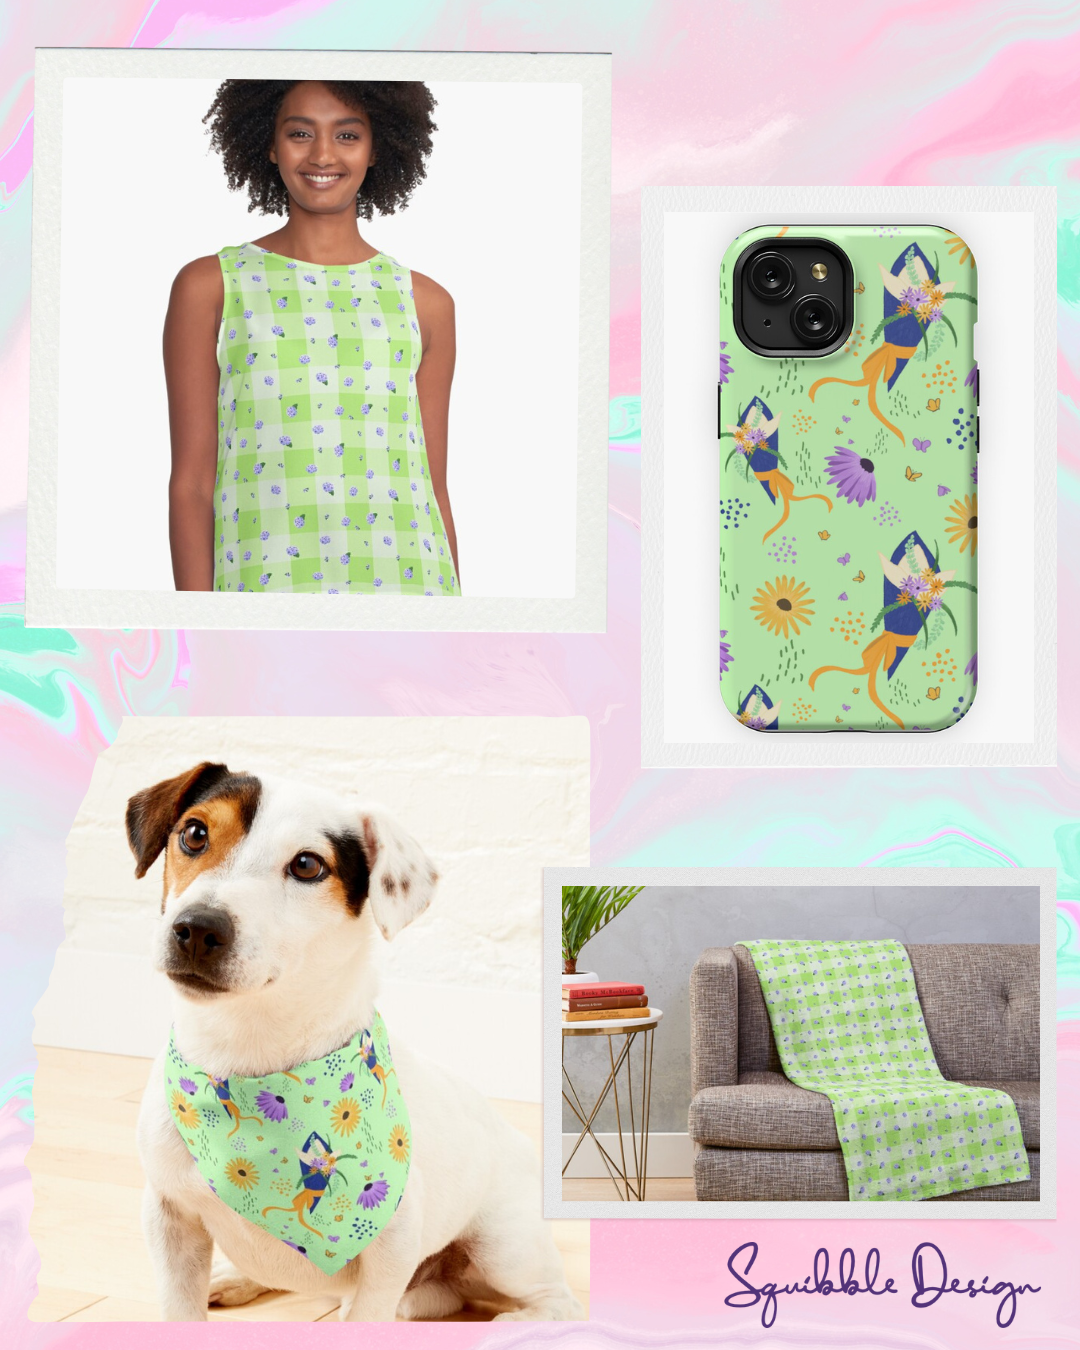 Squibble Design patterns on products at Redbubble.